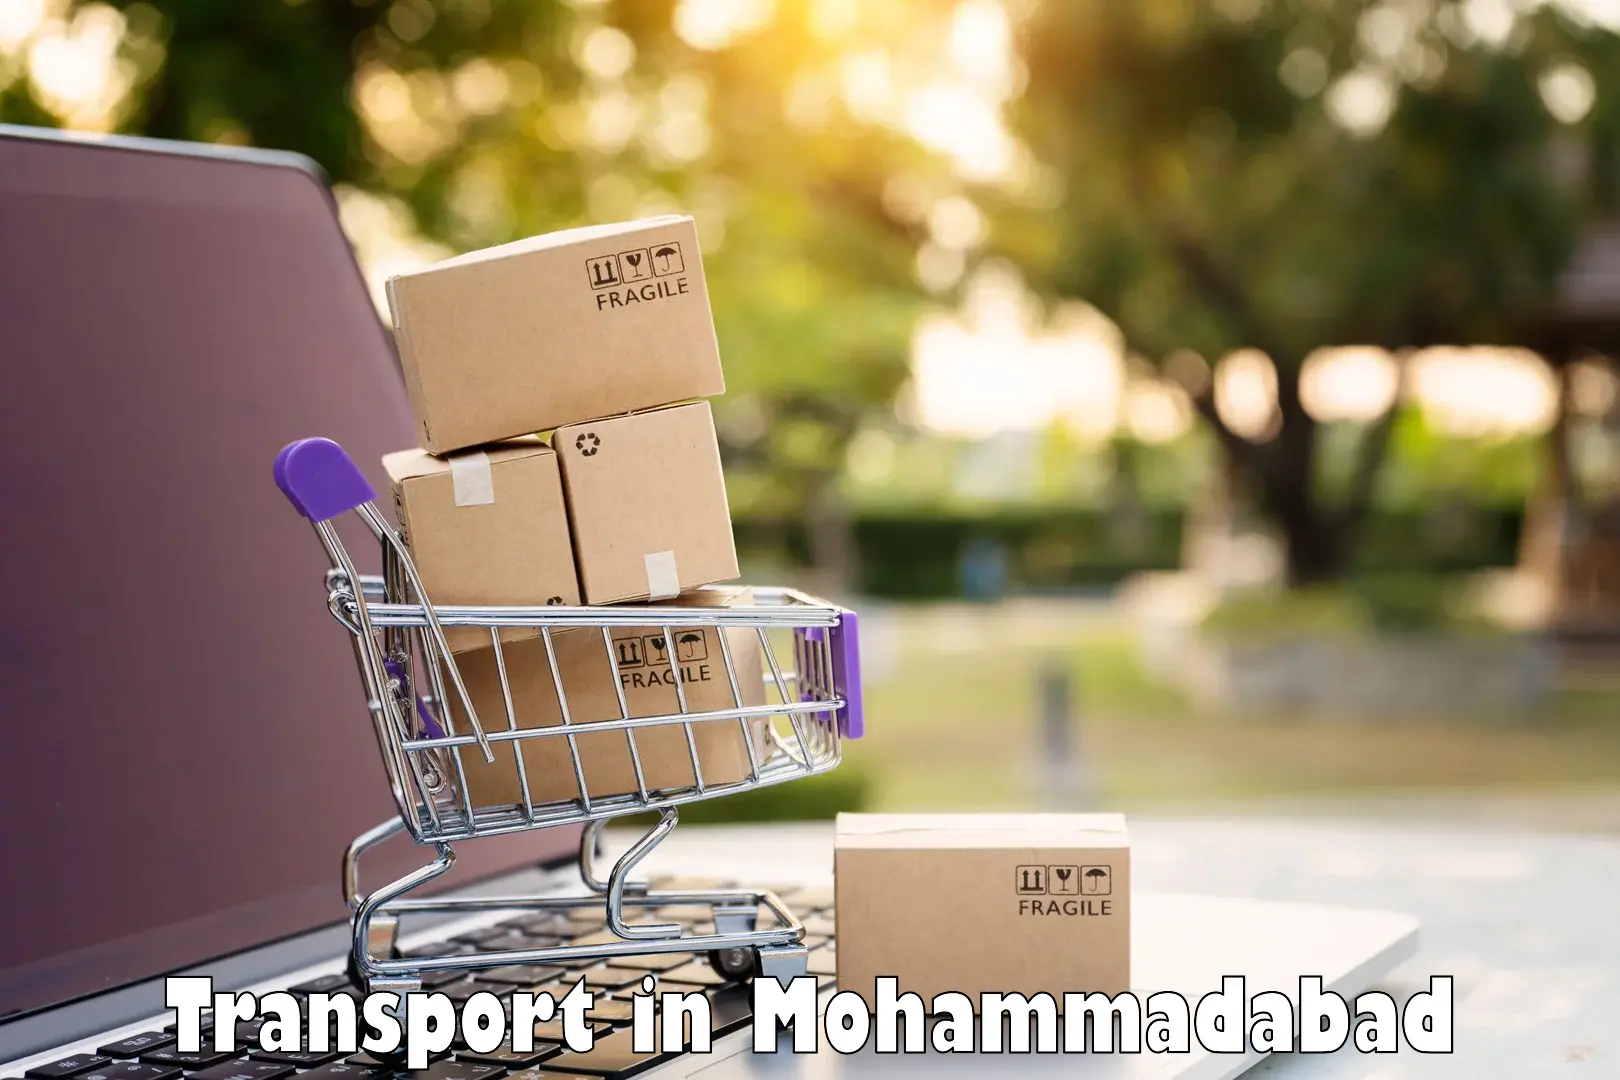 Luggage transport services in Mohammadabad